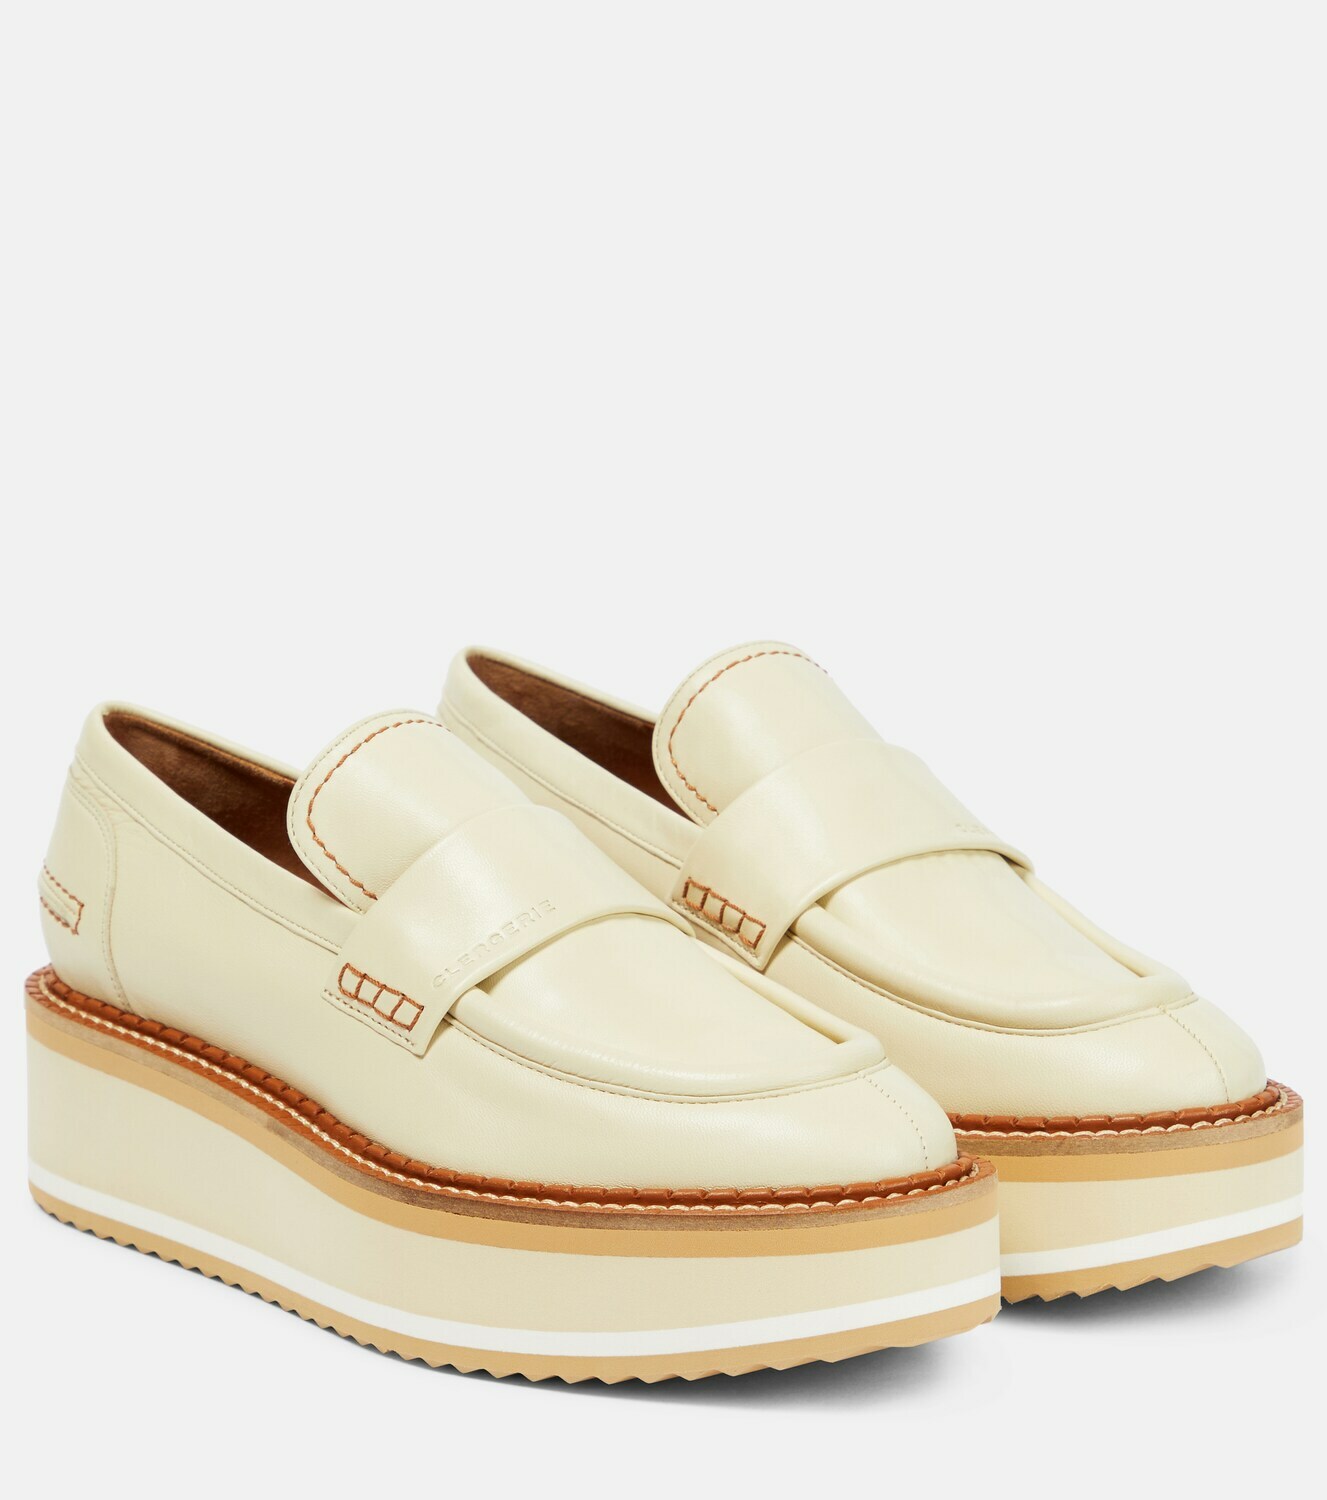 Clergerie - Bahati leather platform loafers Clergerie